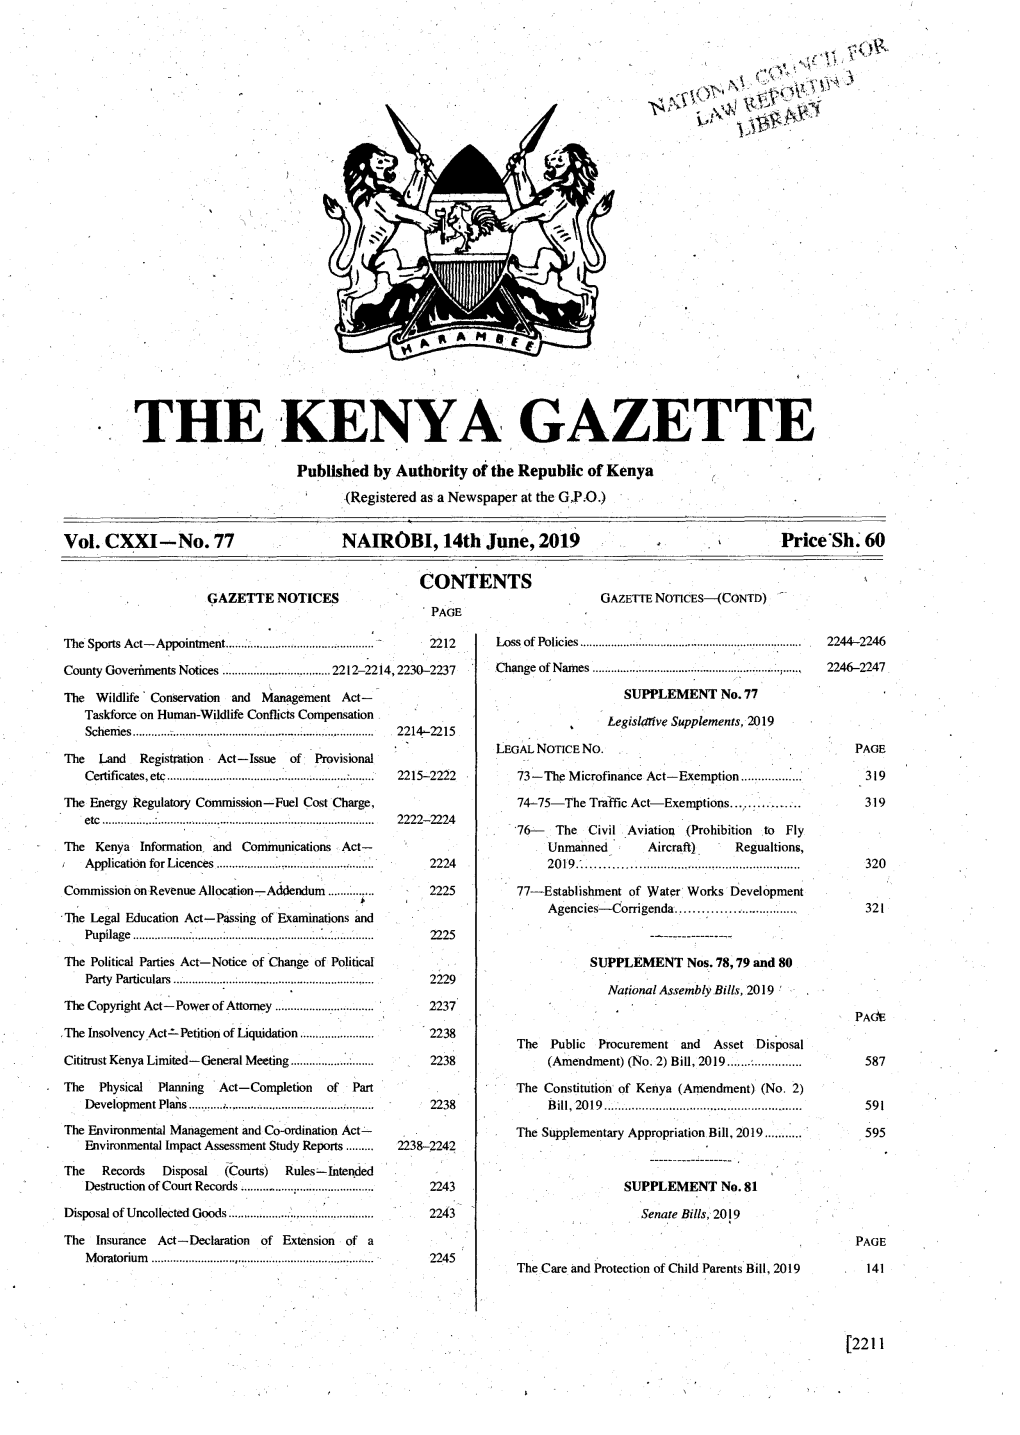 THE KENYA GAZETTE Published by Authority of the Republic of Kenya '� (Registered As a Newspaper at the G.P.O.) � Vol